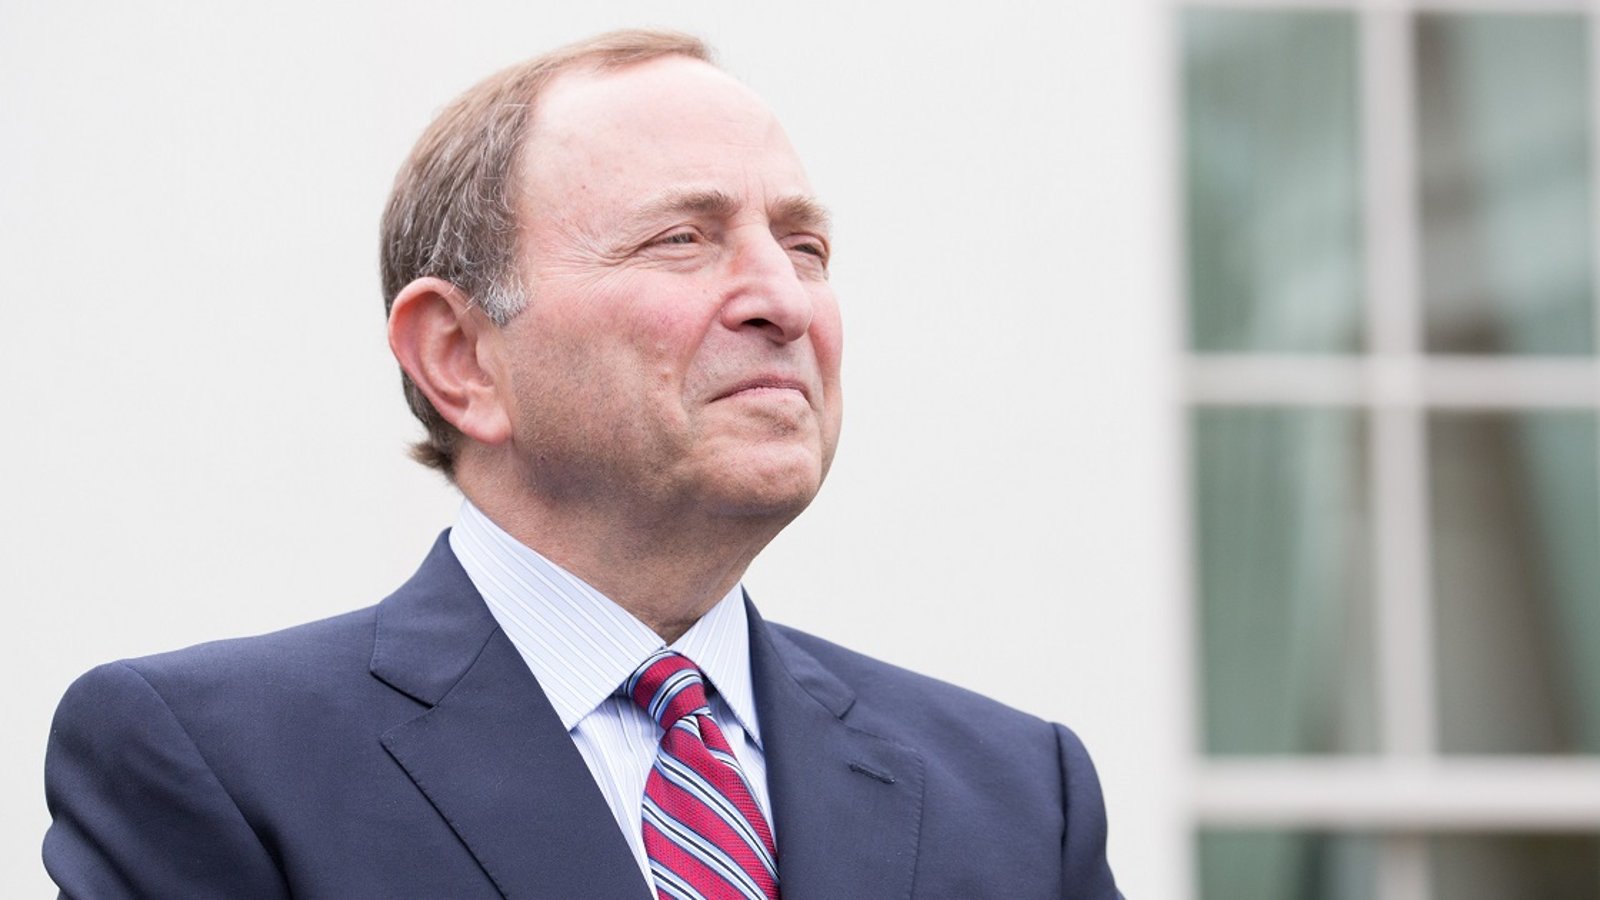 Rumor: Gary Bettman's time in the NHL may be coming to an end.